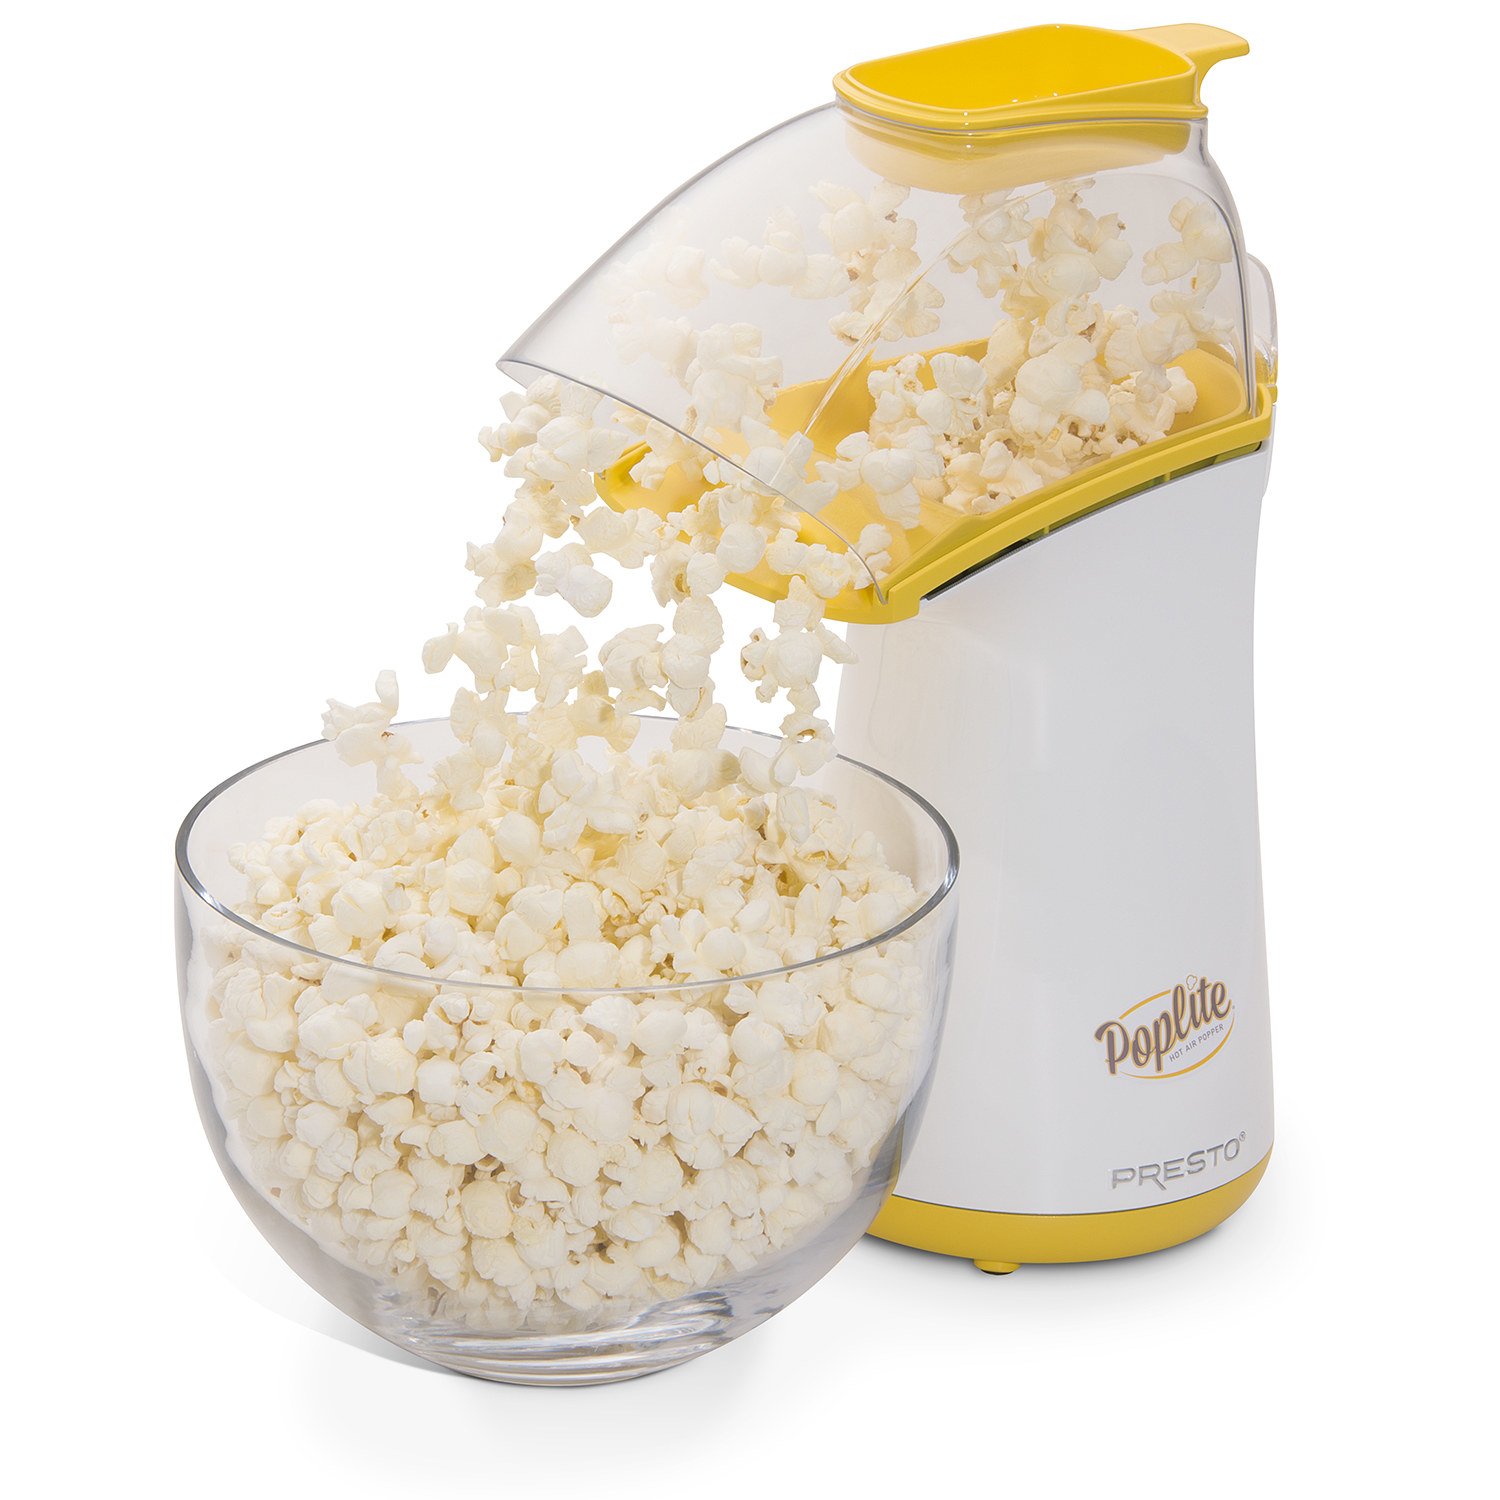 The yellow hot air popcorn popper